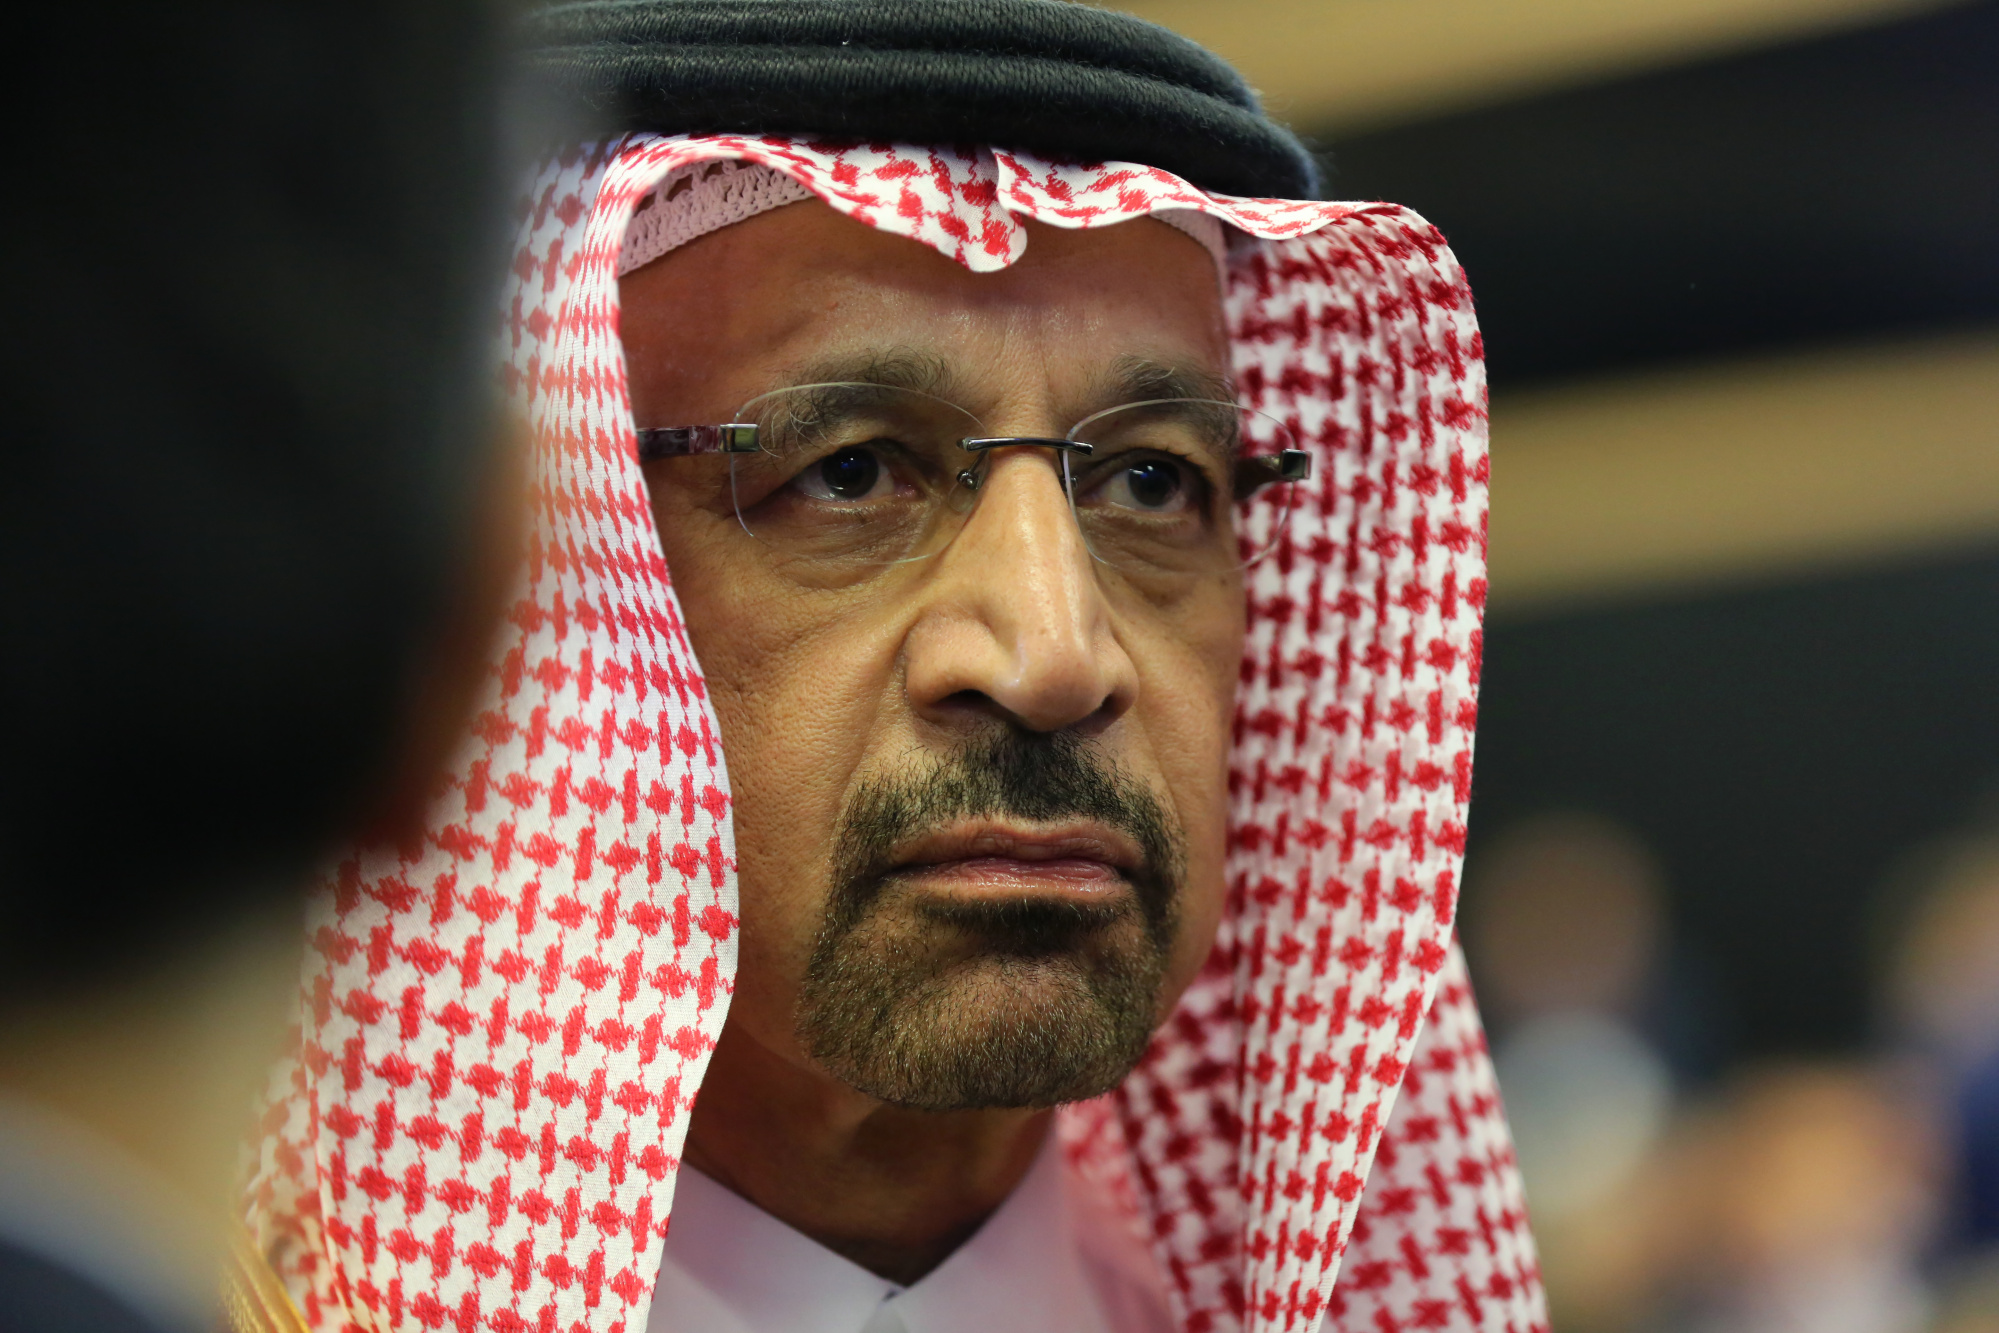 Khalid al-Falih, Saudi Arabia's energy minister, looks on during a panel debate at the St. Petersburg International Economic Forum (SPIEF) in St. Petersburg, Russia, on Friday, May 25, 2018. The economic forum this year will be attended by President Vladimir Putin and French President Emmanuel Macron, and panels include everything from how to do business in Russia to biotechnology and blockchain. Photographer: Chris Ratcliffe/Bloomberg